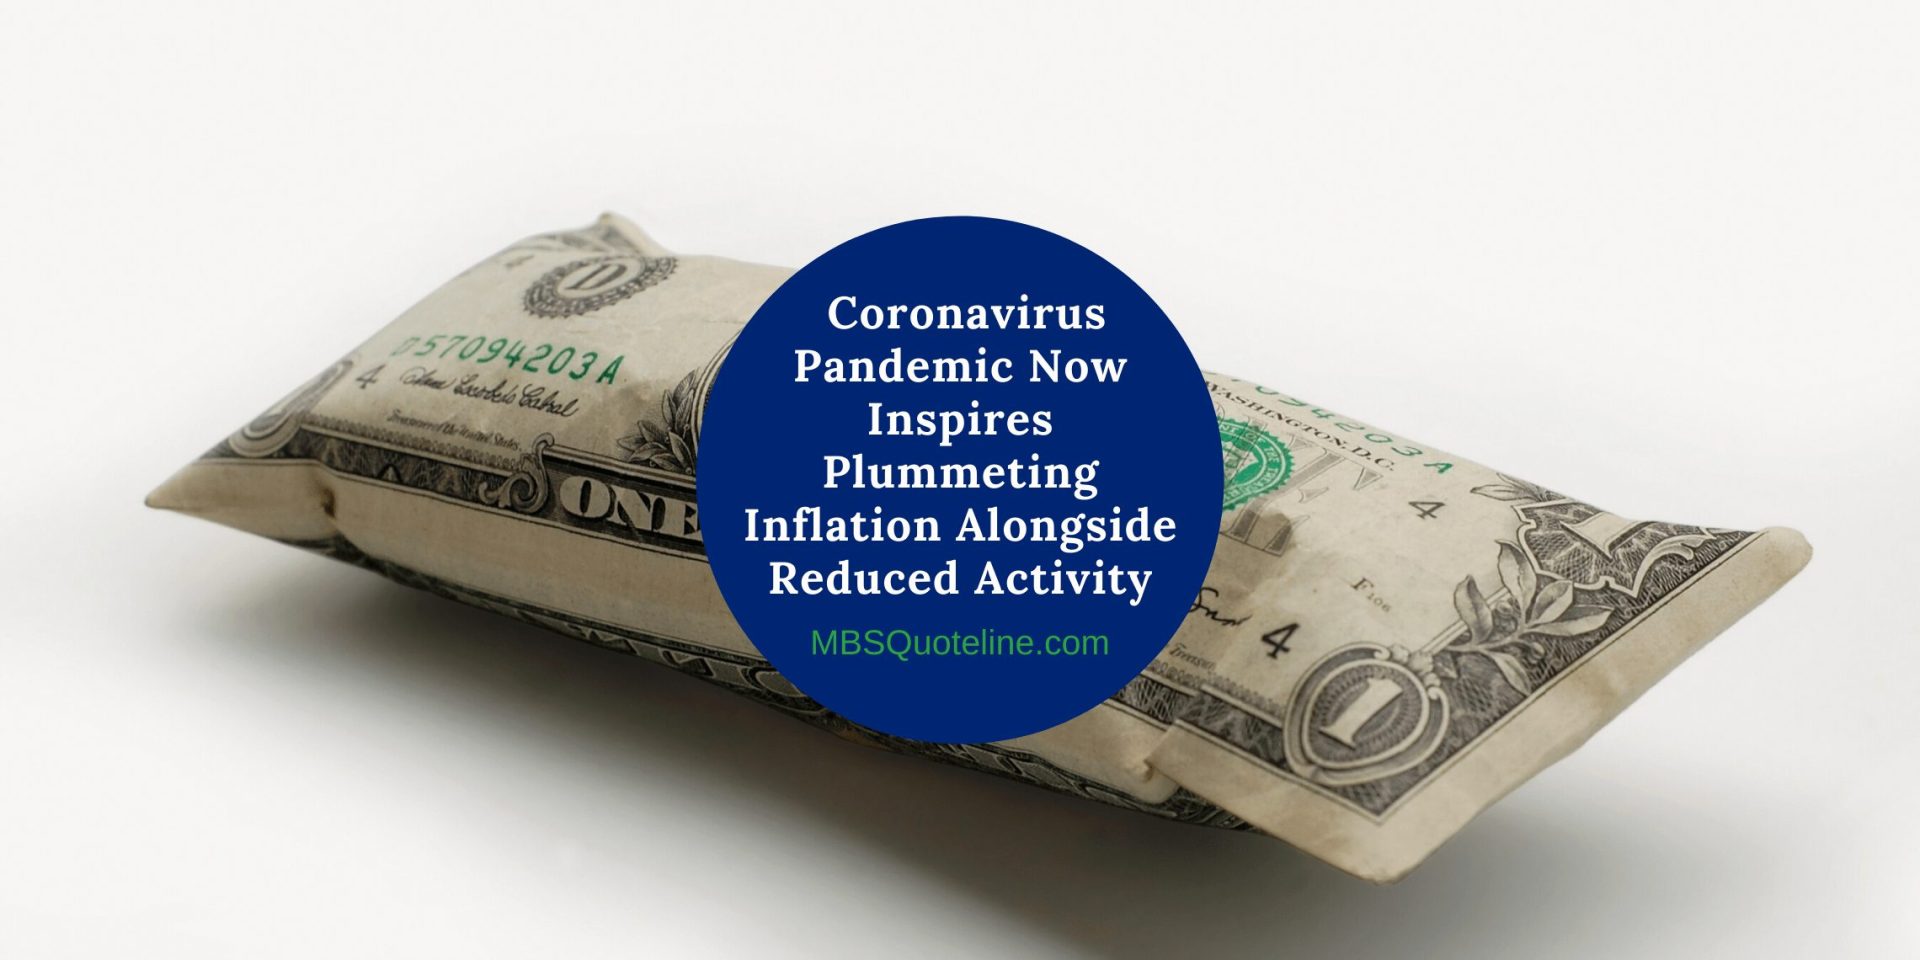 Coronavirus Pandemic Now Inspires Plummeting Inflation Alongside Reduced Activity featured mortgagetime mbsquoteline